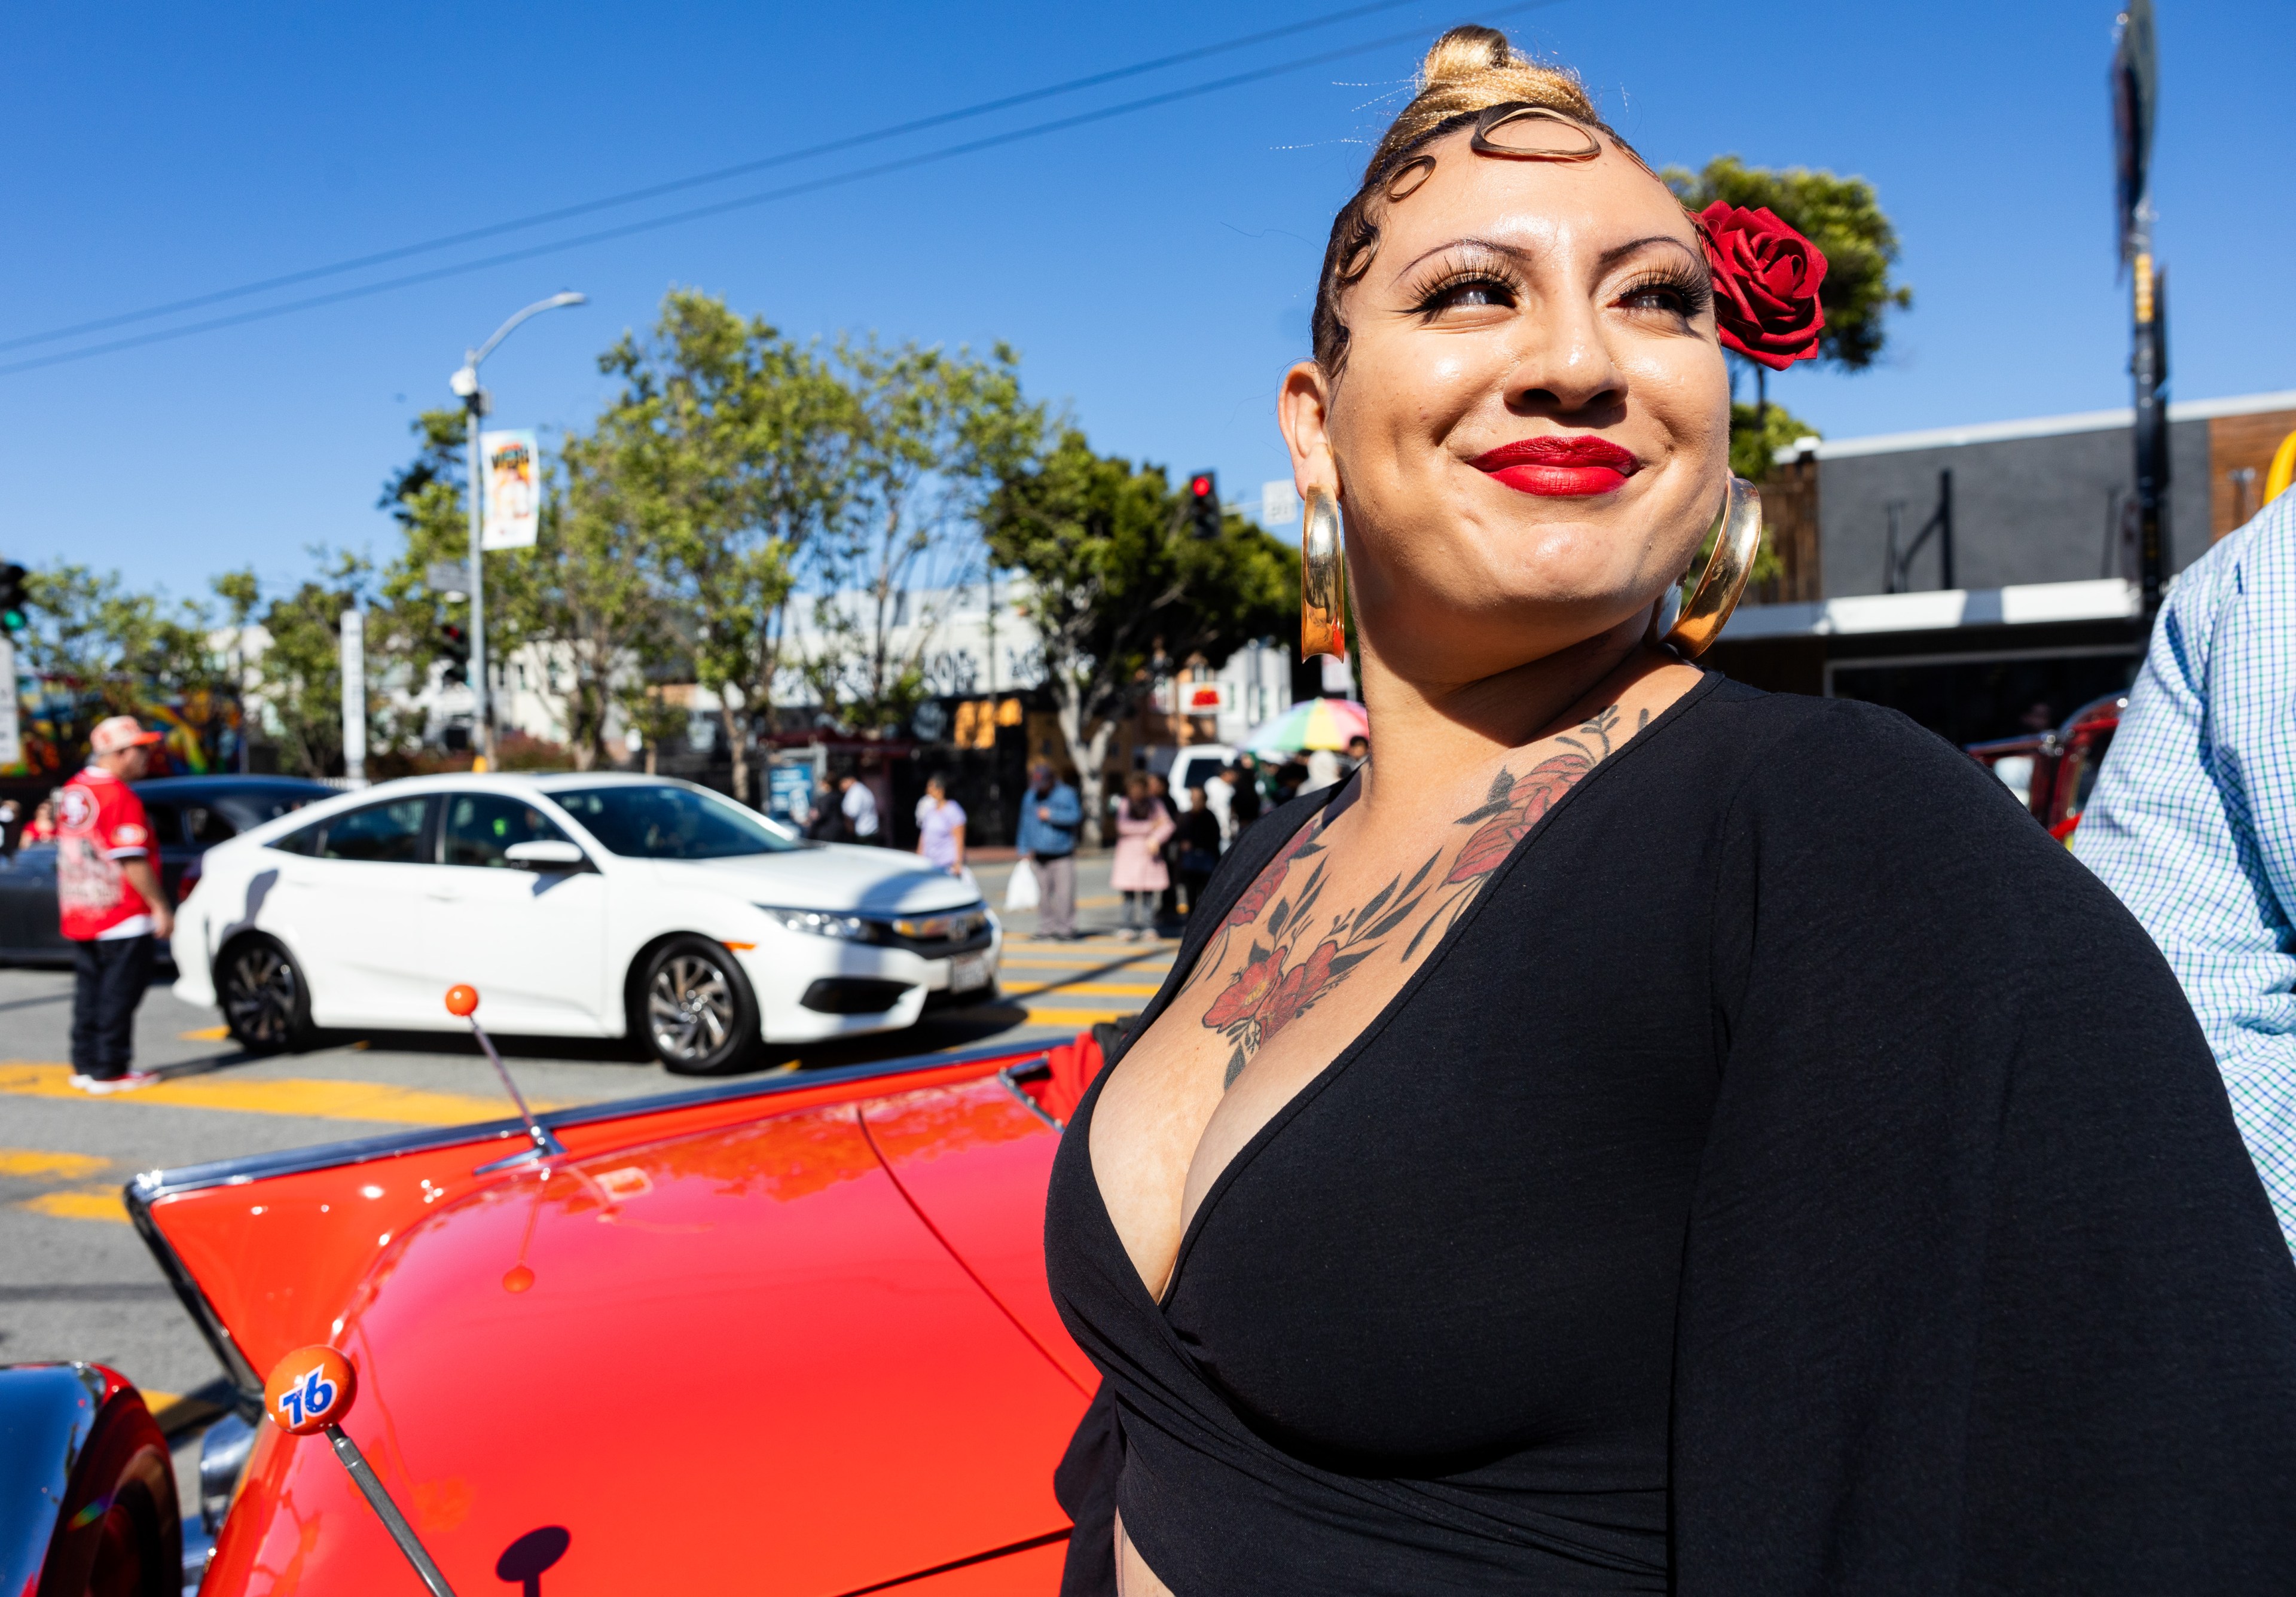 A woman with a red flower in her hair smiles on a sunny street with cars and pedestrians in the background.